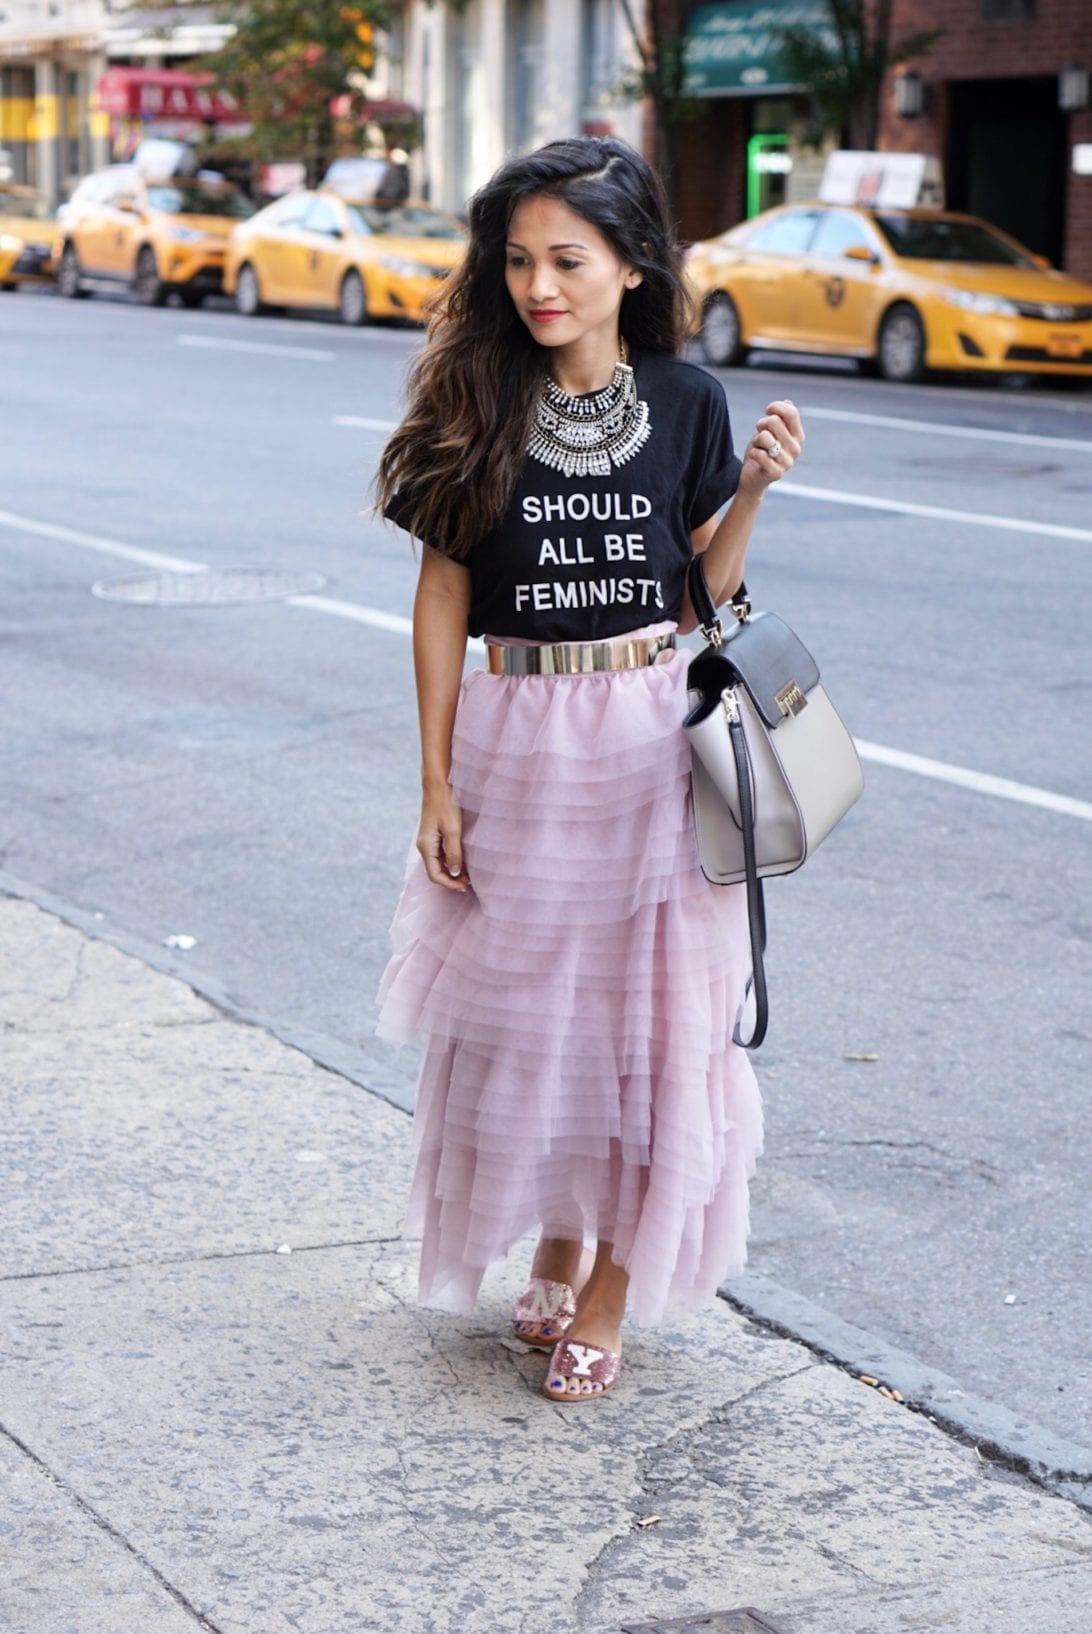 NYC STREET STYLE, New York FASHION WEEK, New York CITY, NYFW 2017, NYFW STREET STYLE, STREET STYLE, FEMINIST, TULLE SKIRT, SEX AND THE CITY OUTFIT, NY GLITTER FLATS, ZAC ZAC POSEN BAG, VOGUE PARTY, VOGUE BRUNCH 